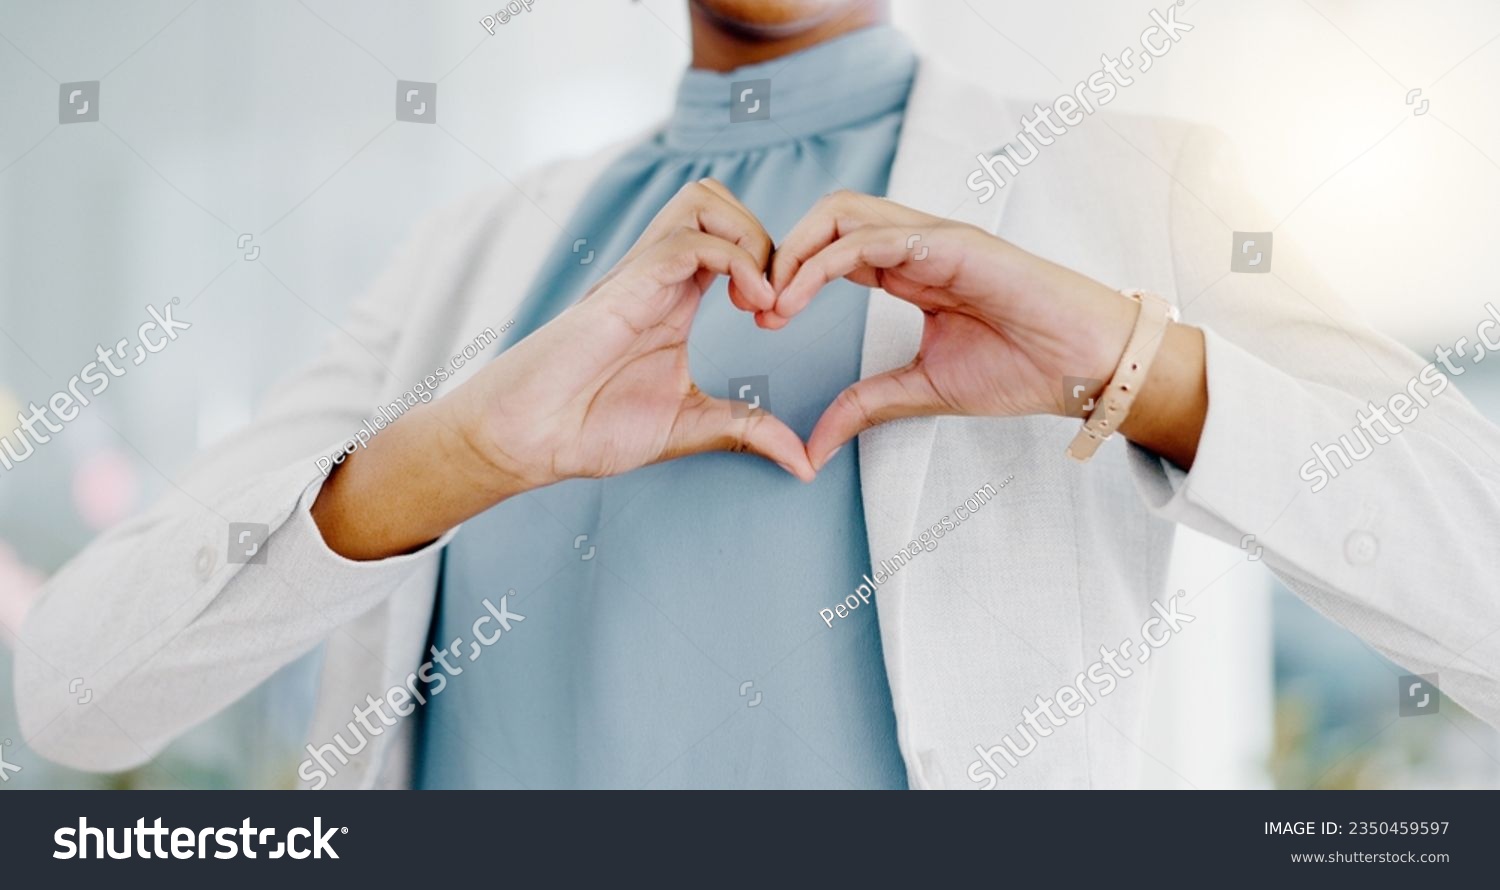 Hands, heart and business woman with love emoji for care, kindness and symbol in office. Closeup of happy female worker with finger shape for thank you, trust and sign of hope, support icon and peace #2350459597